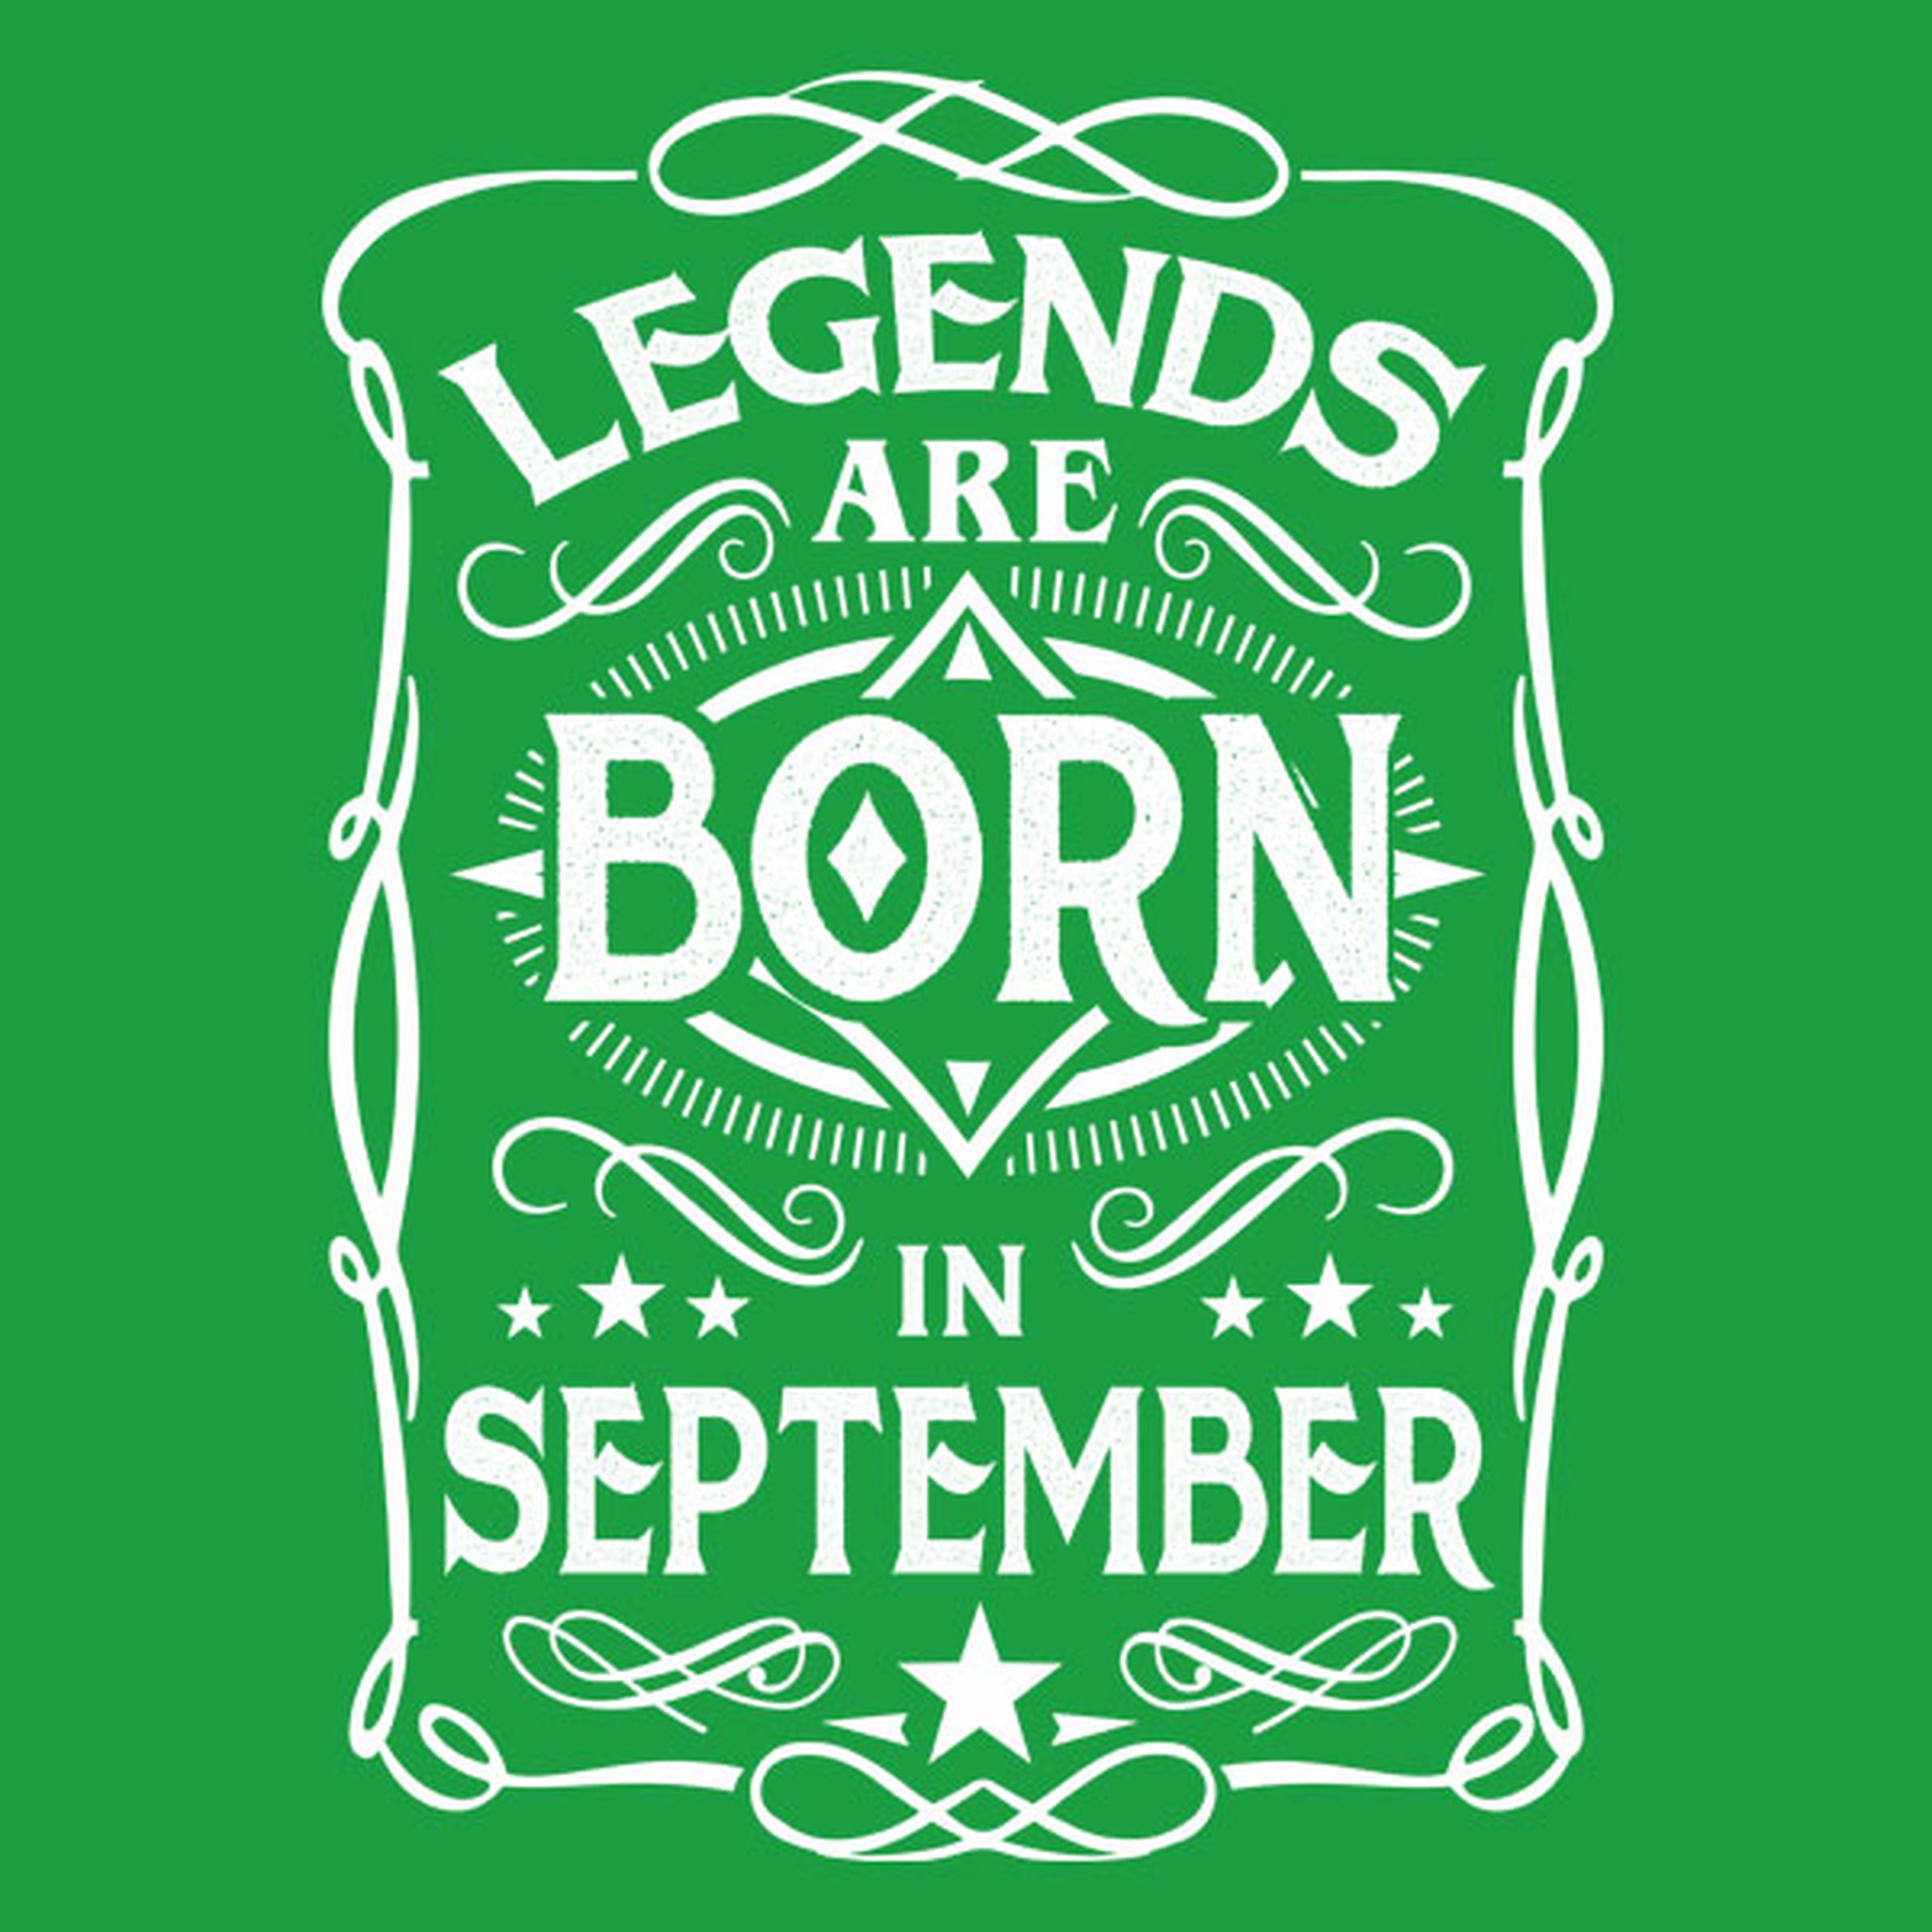 Legends are born in September - T-shirt